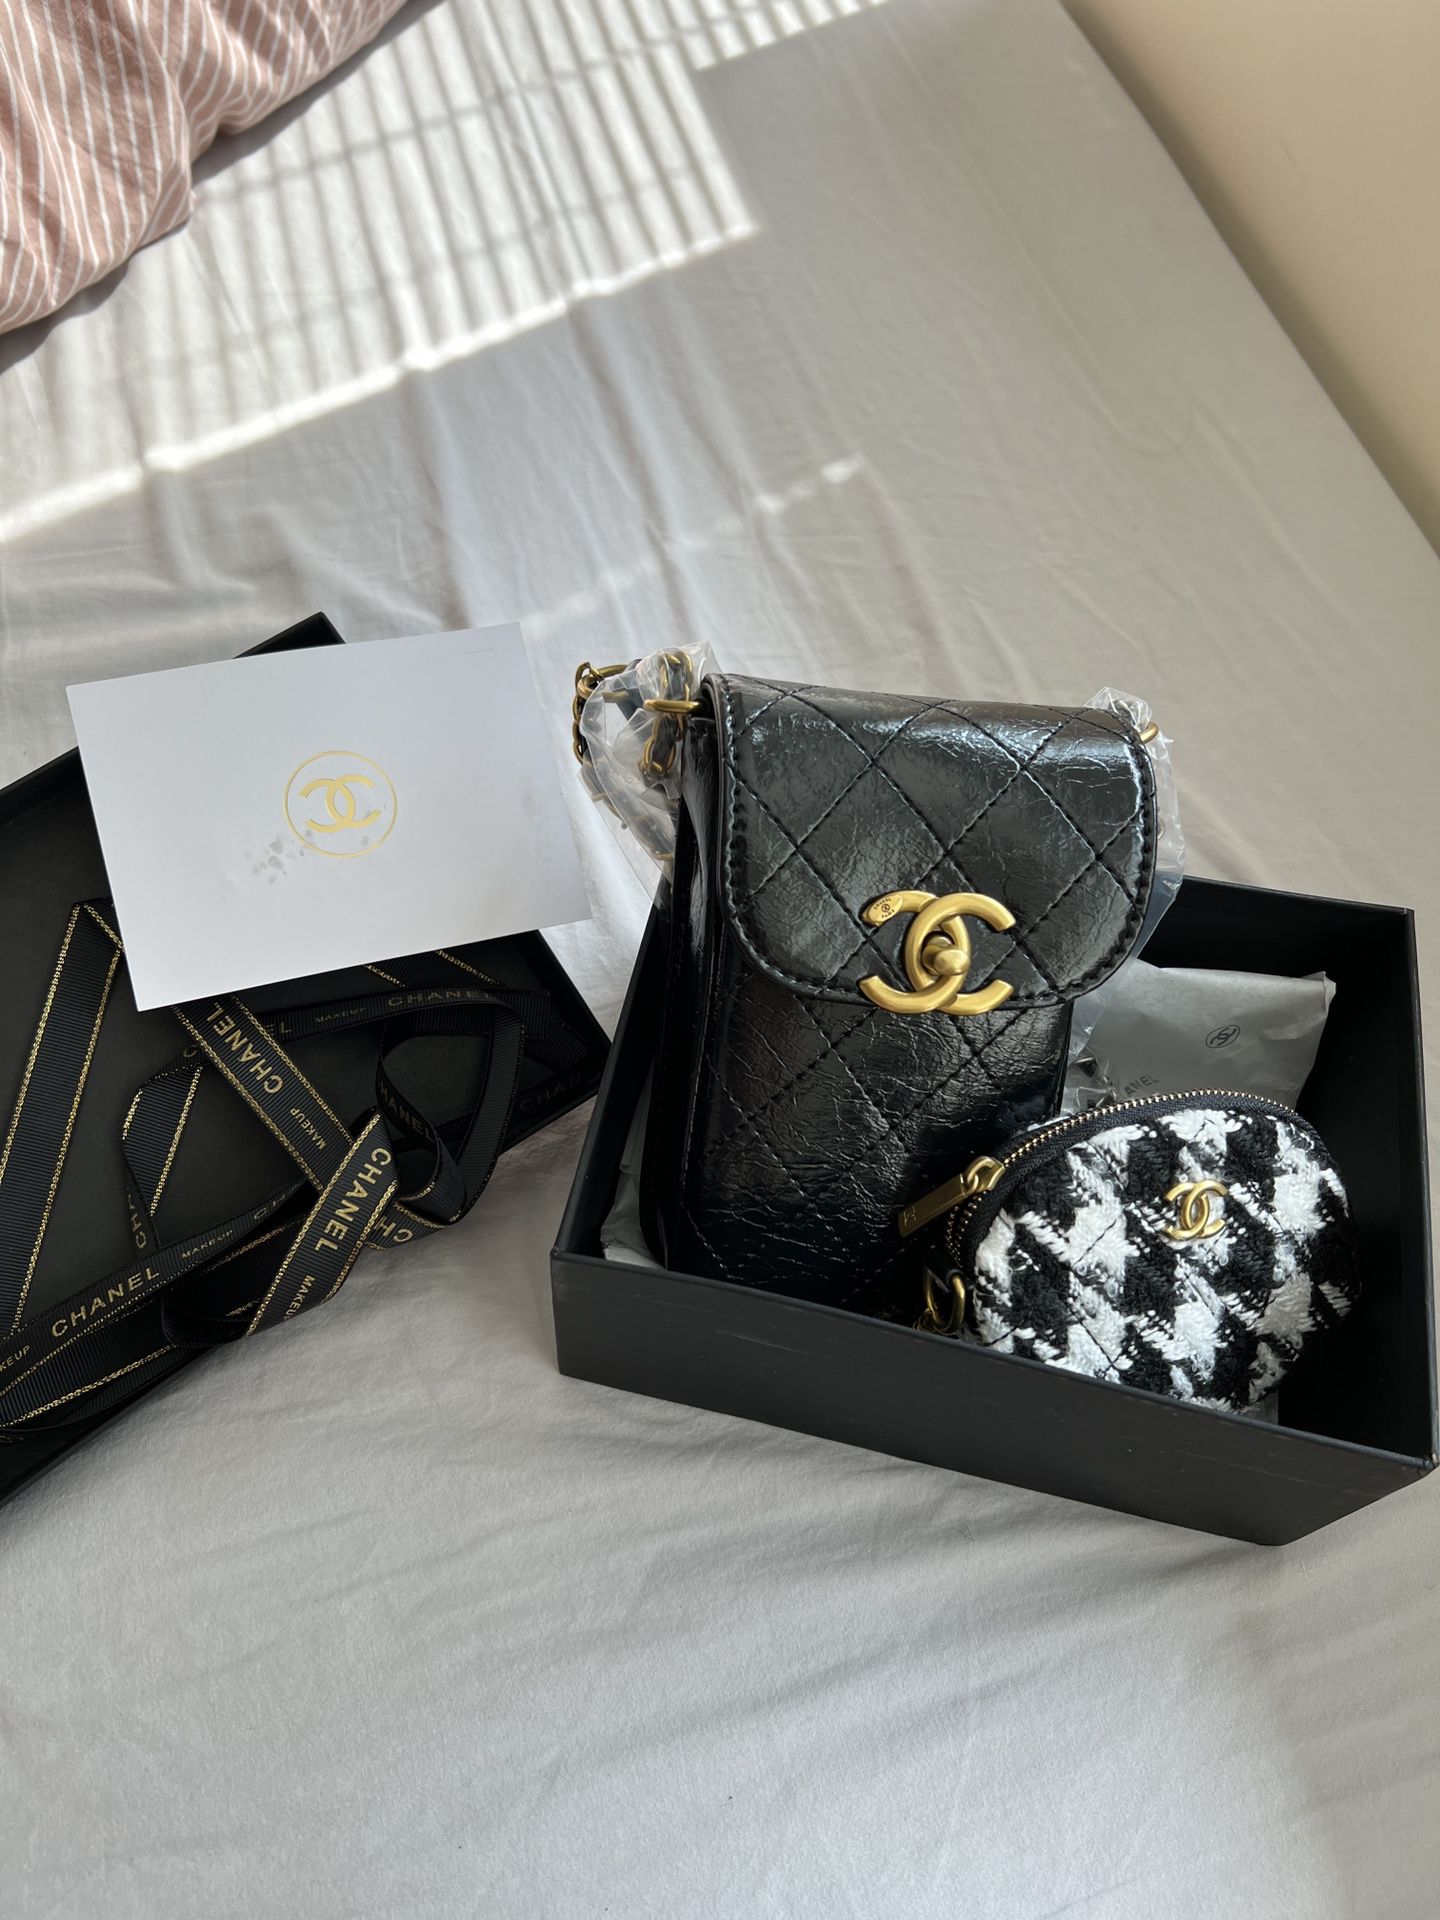 Chanel Phone case crossbody bag AUTHENTIC for Sale in Peck Slip, NY -  OfferUp